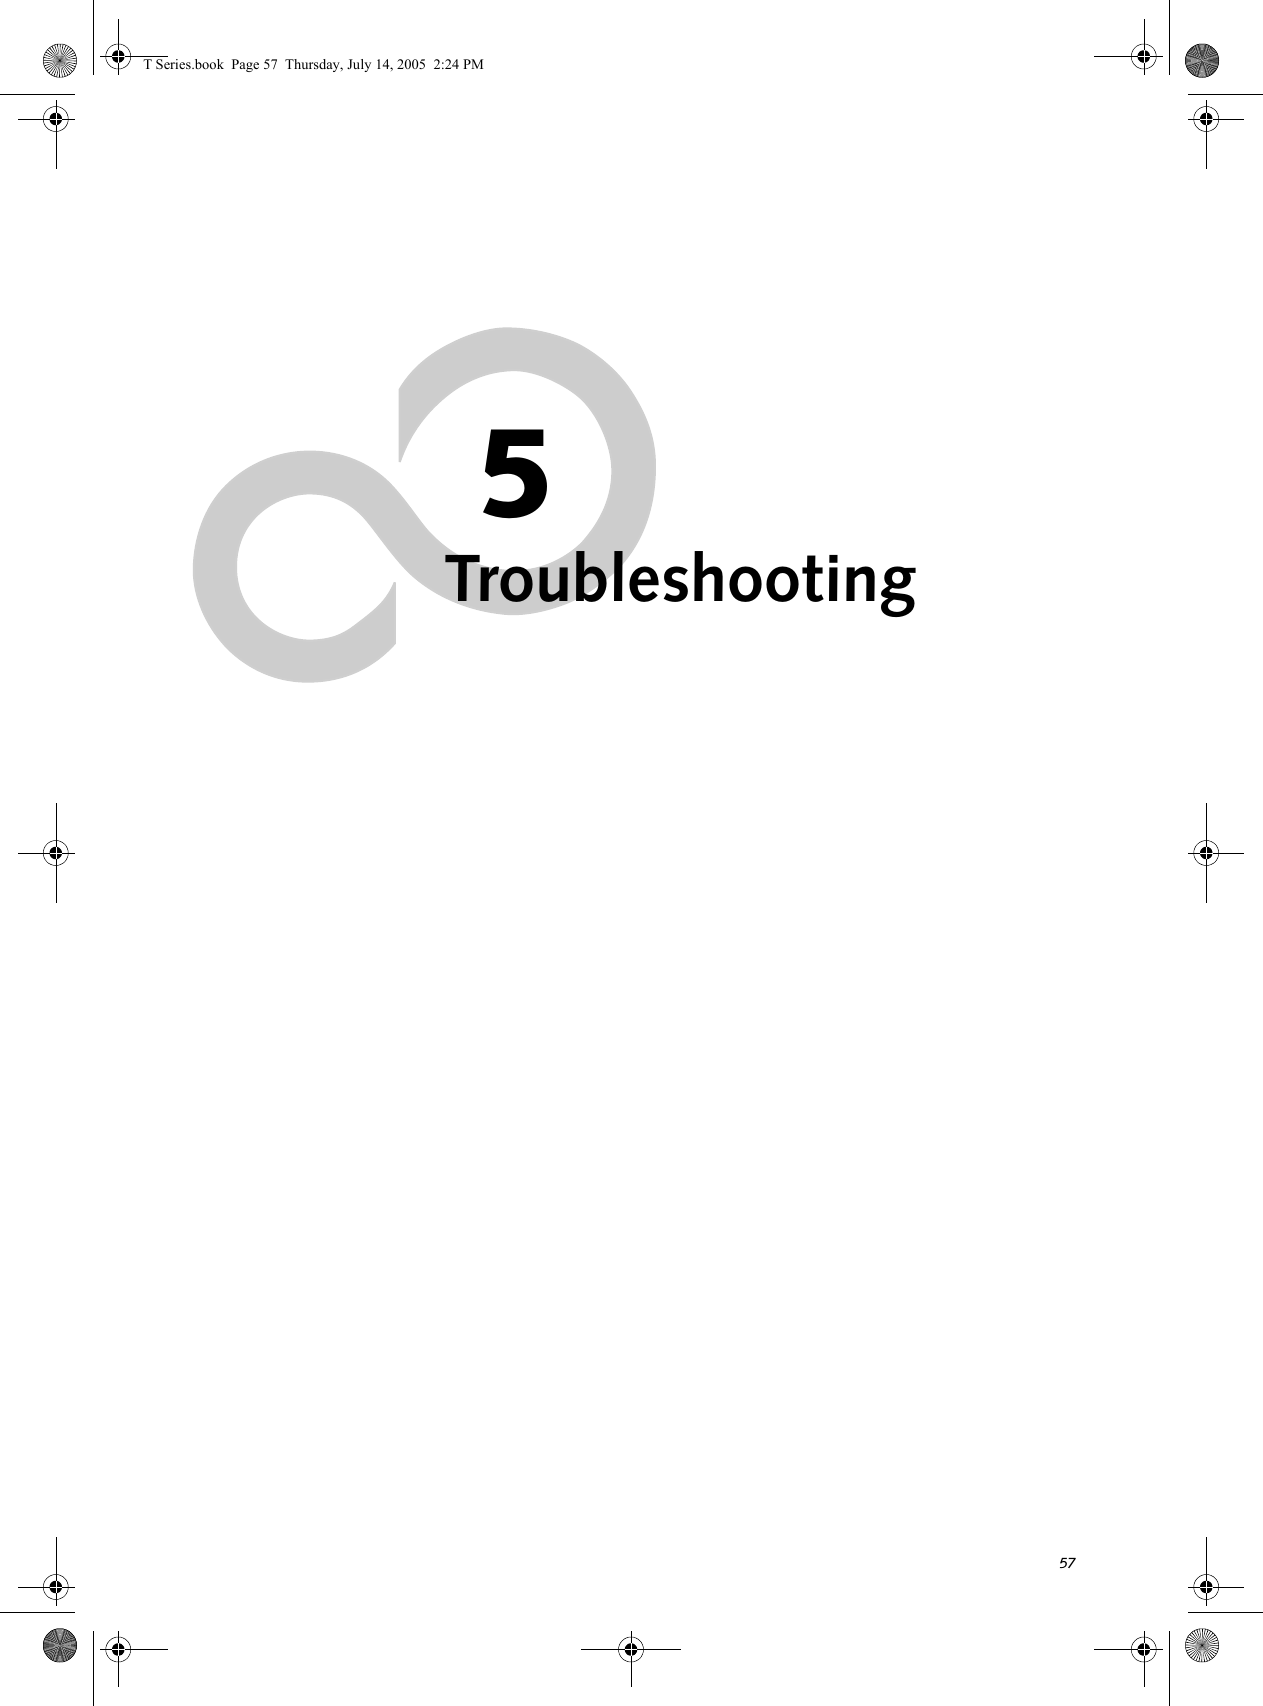 575TroubleshootingT Series.book  Page 57  Thursday, July 14, 2005  2:24 PM